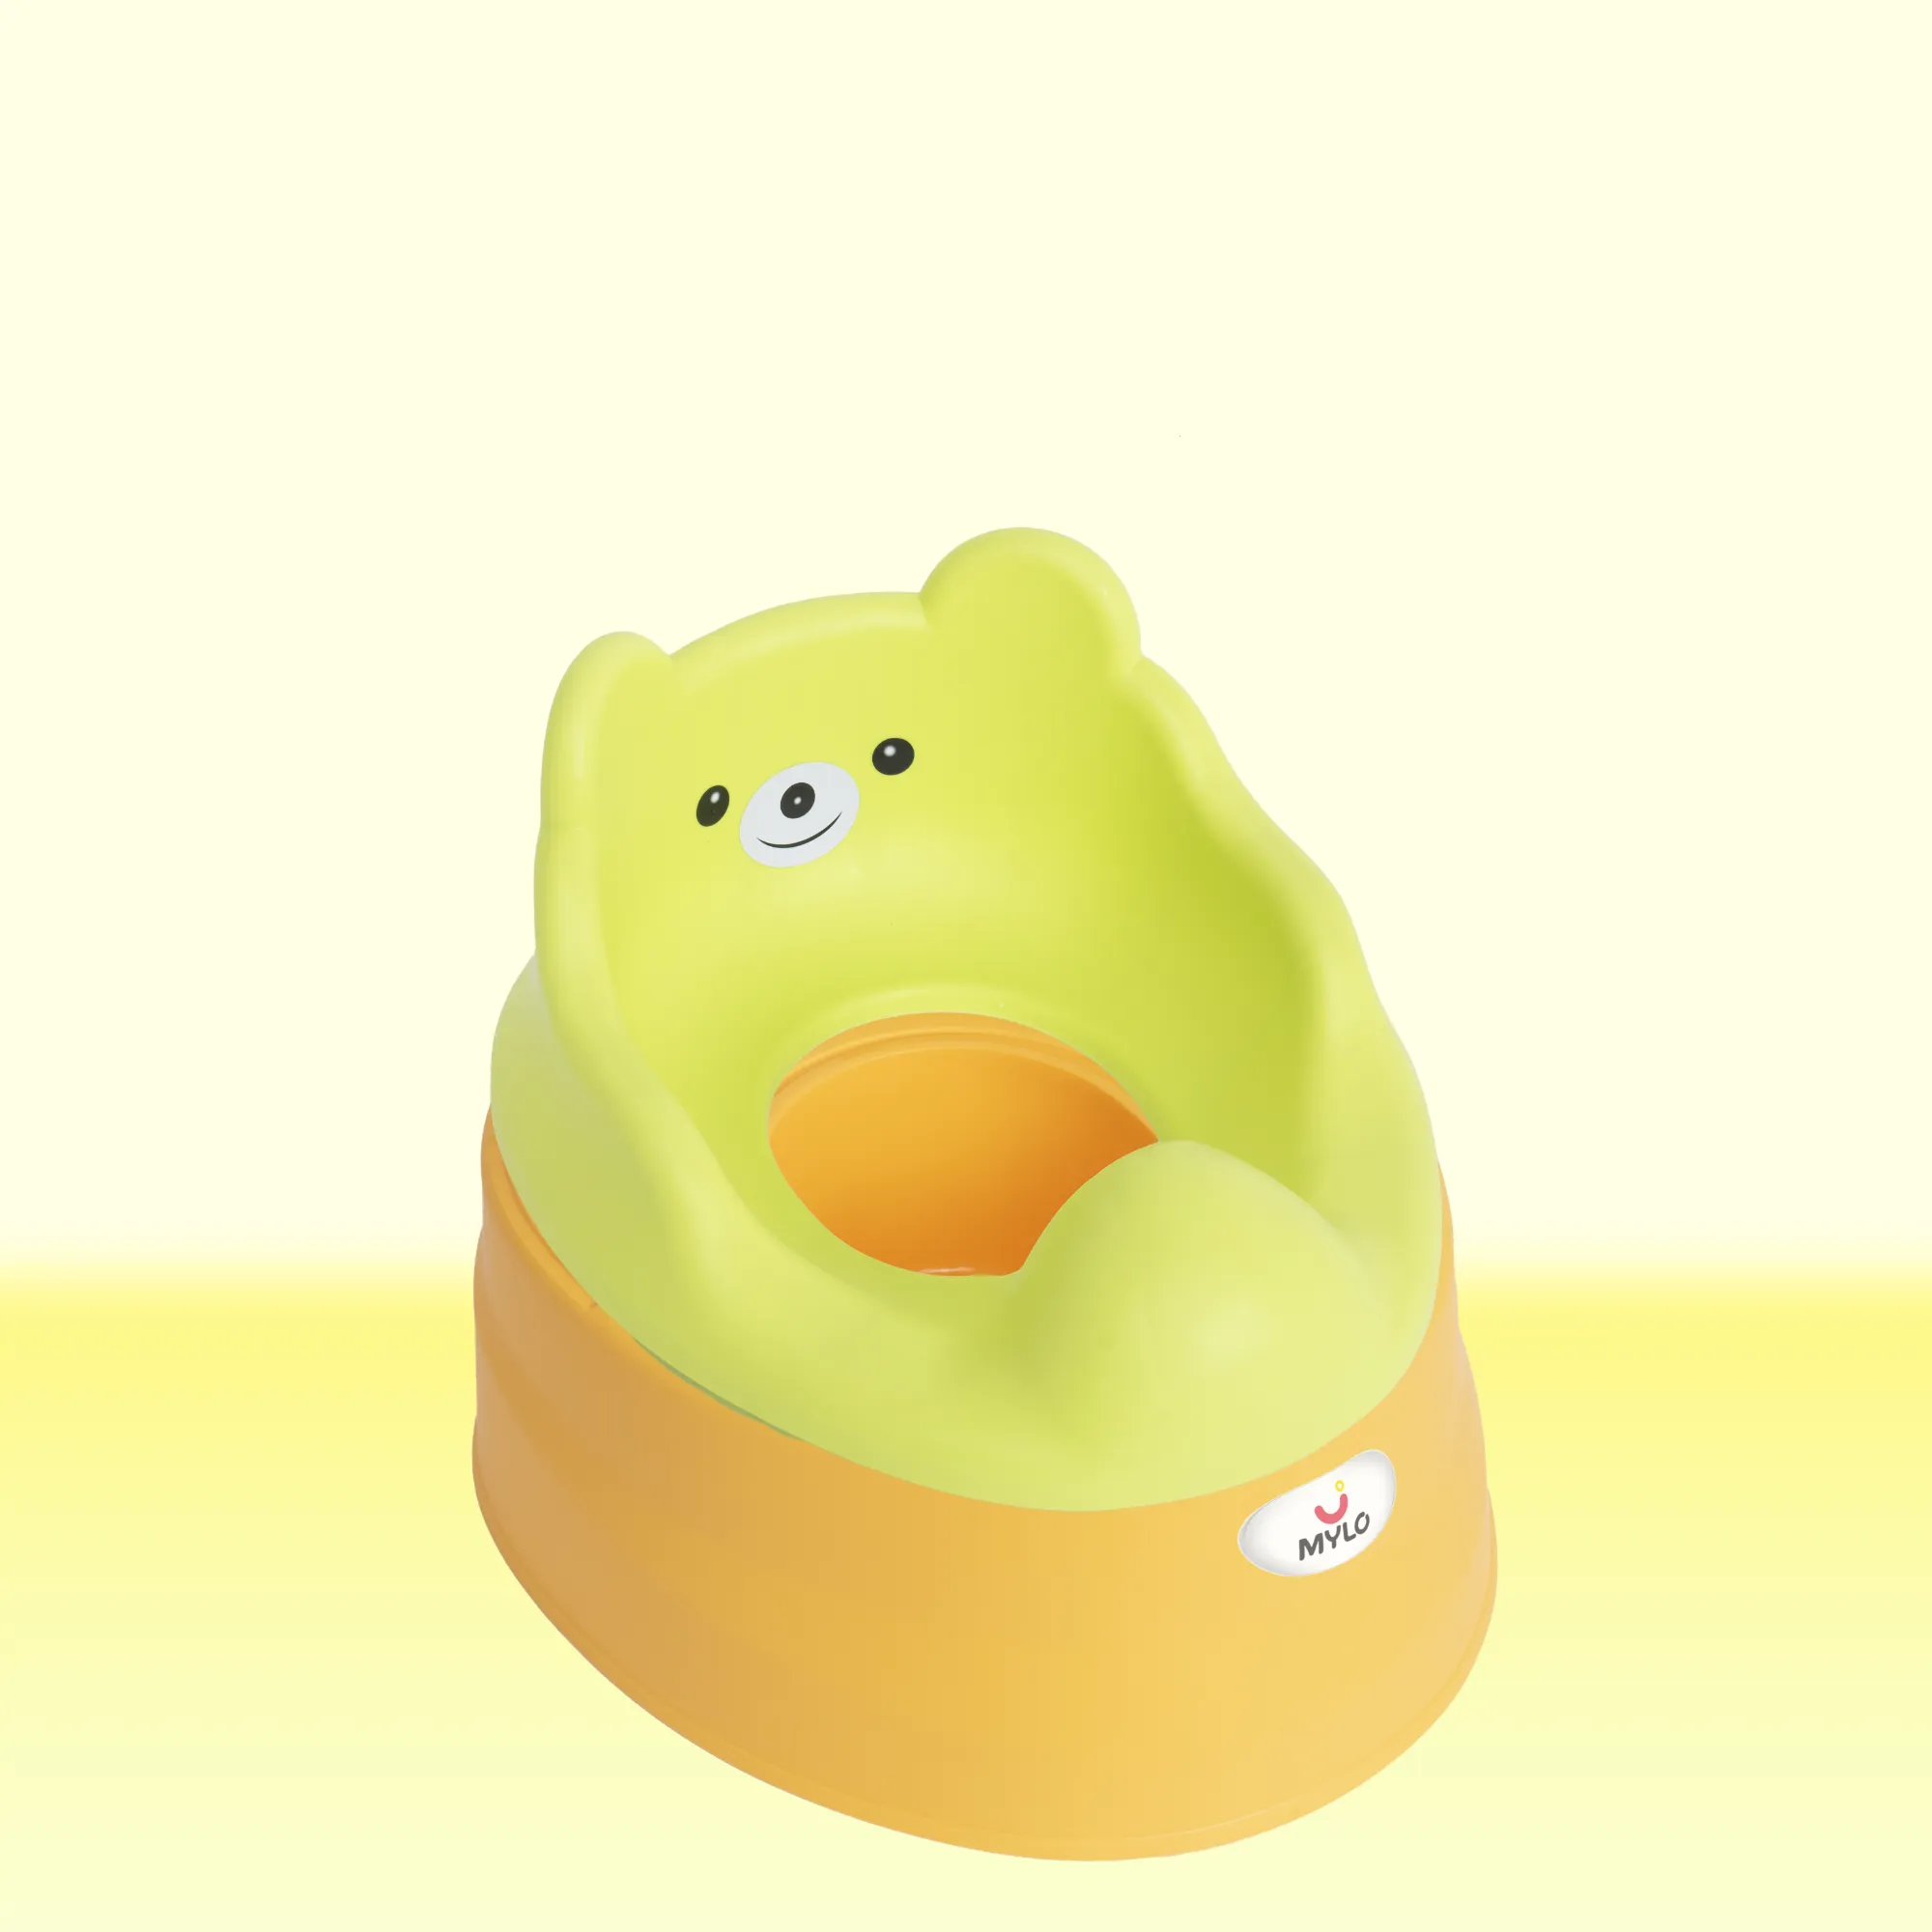 Baby Potty Seat | Baby Potty Chair | 2-in-1 Potty Training Chair with Detachable Potty Bowl | Easy to Carry & Clean - Green & Yellow